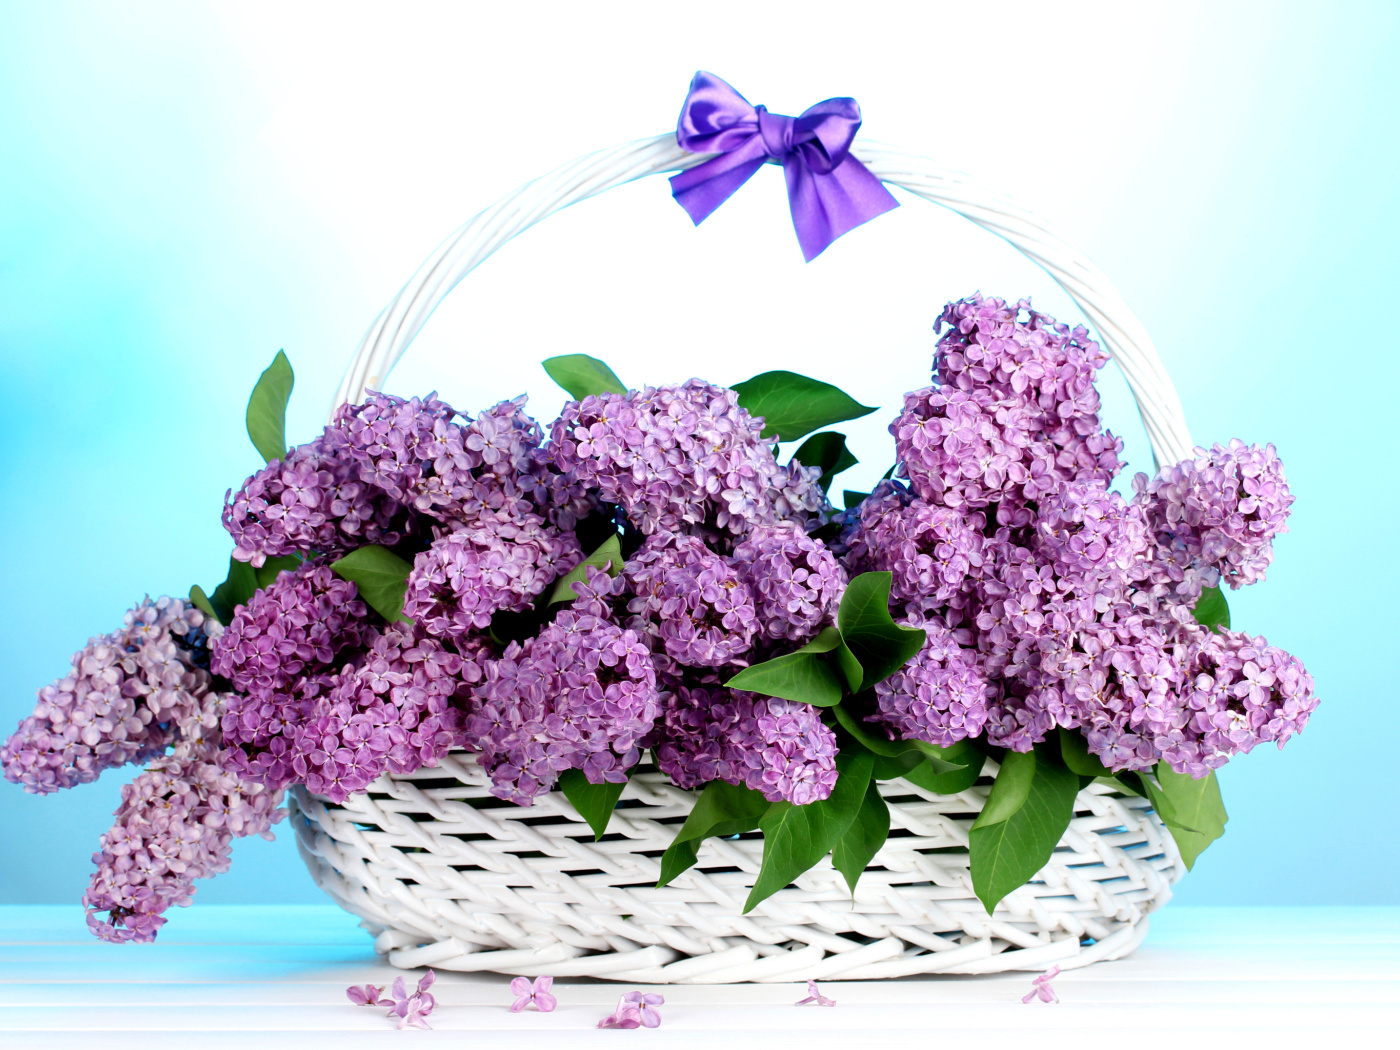 Baskets with lilac flowers wallpaper 1400x1050